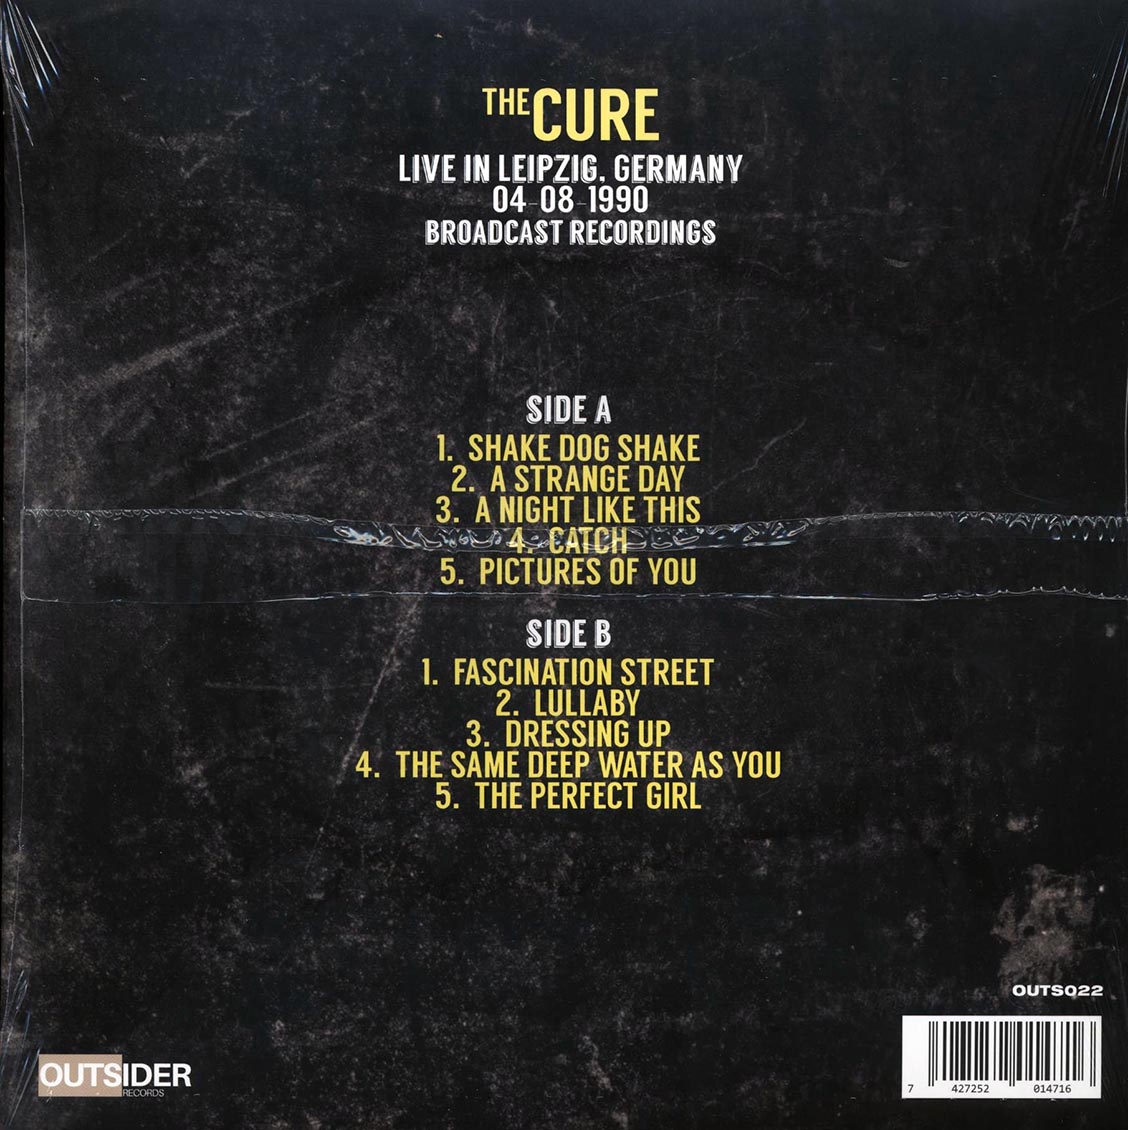 The Cure - A Lullaby In Leipzig Volume 1